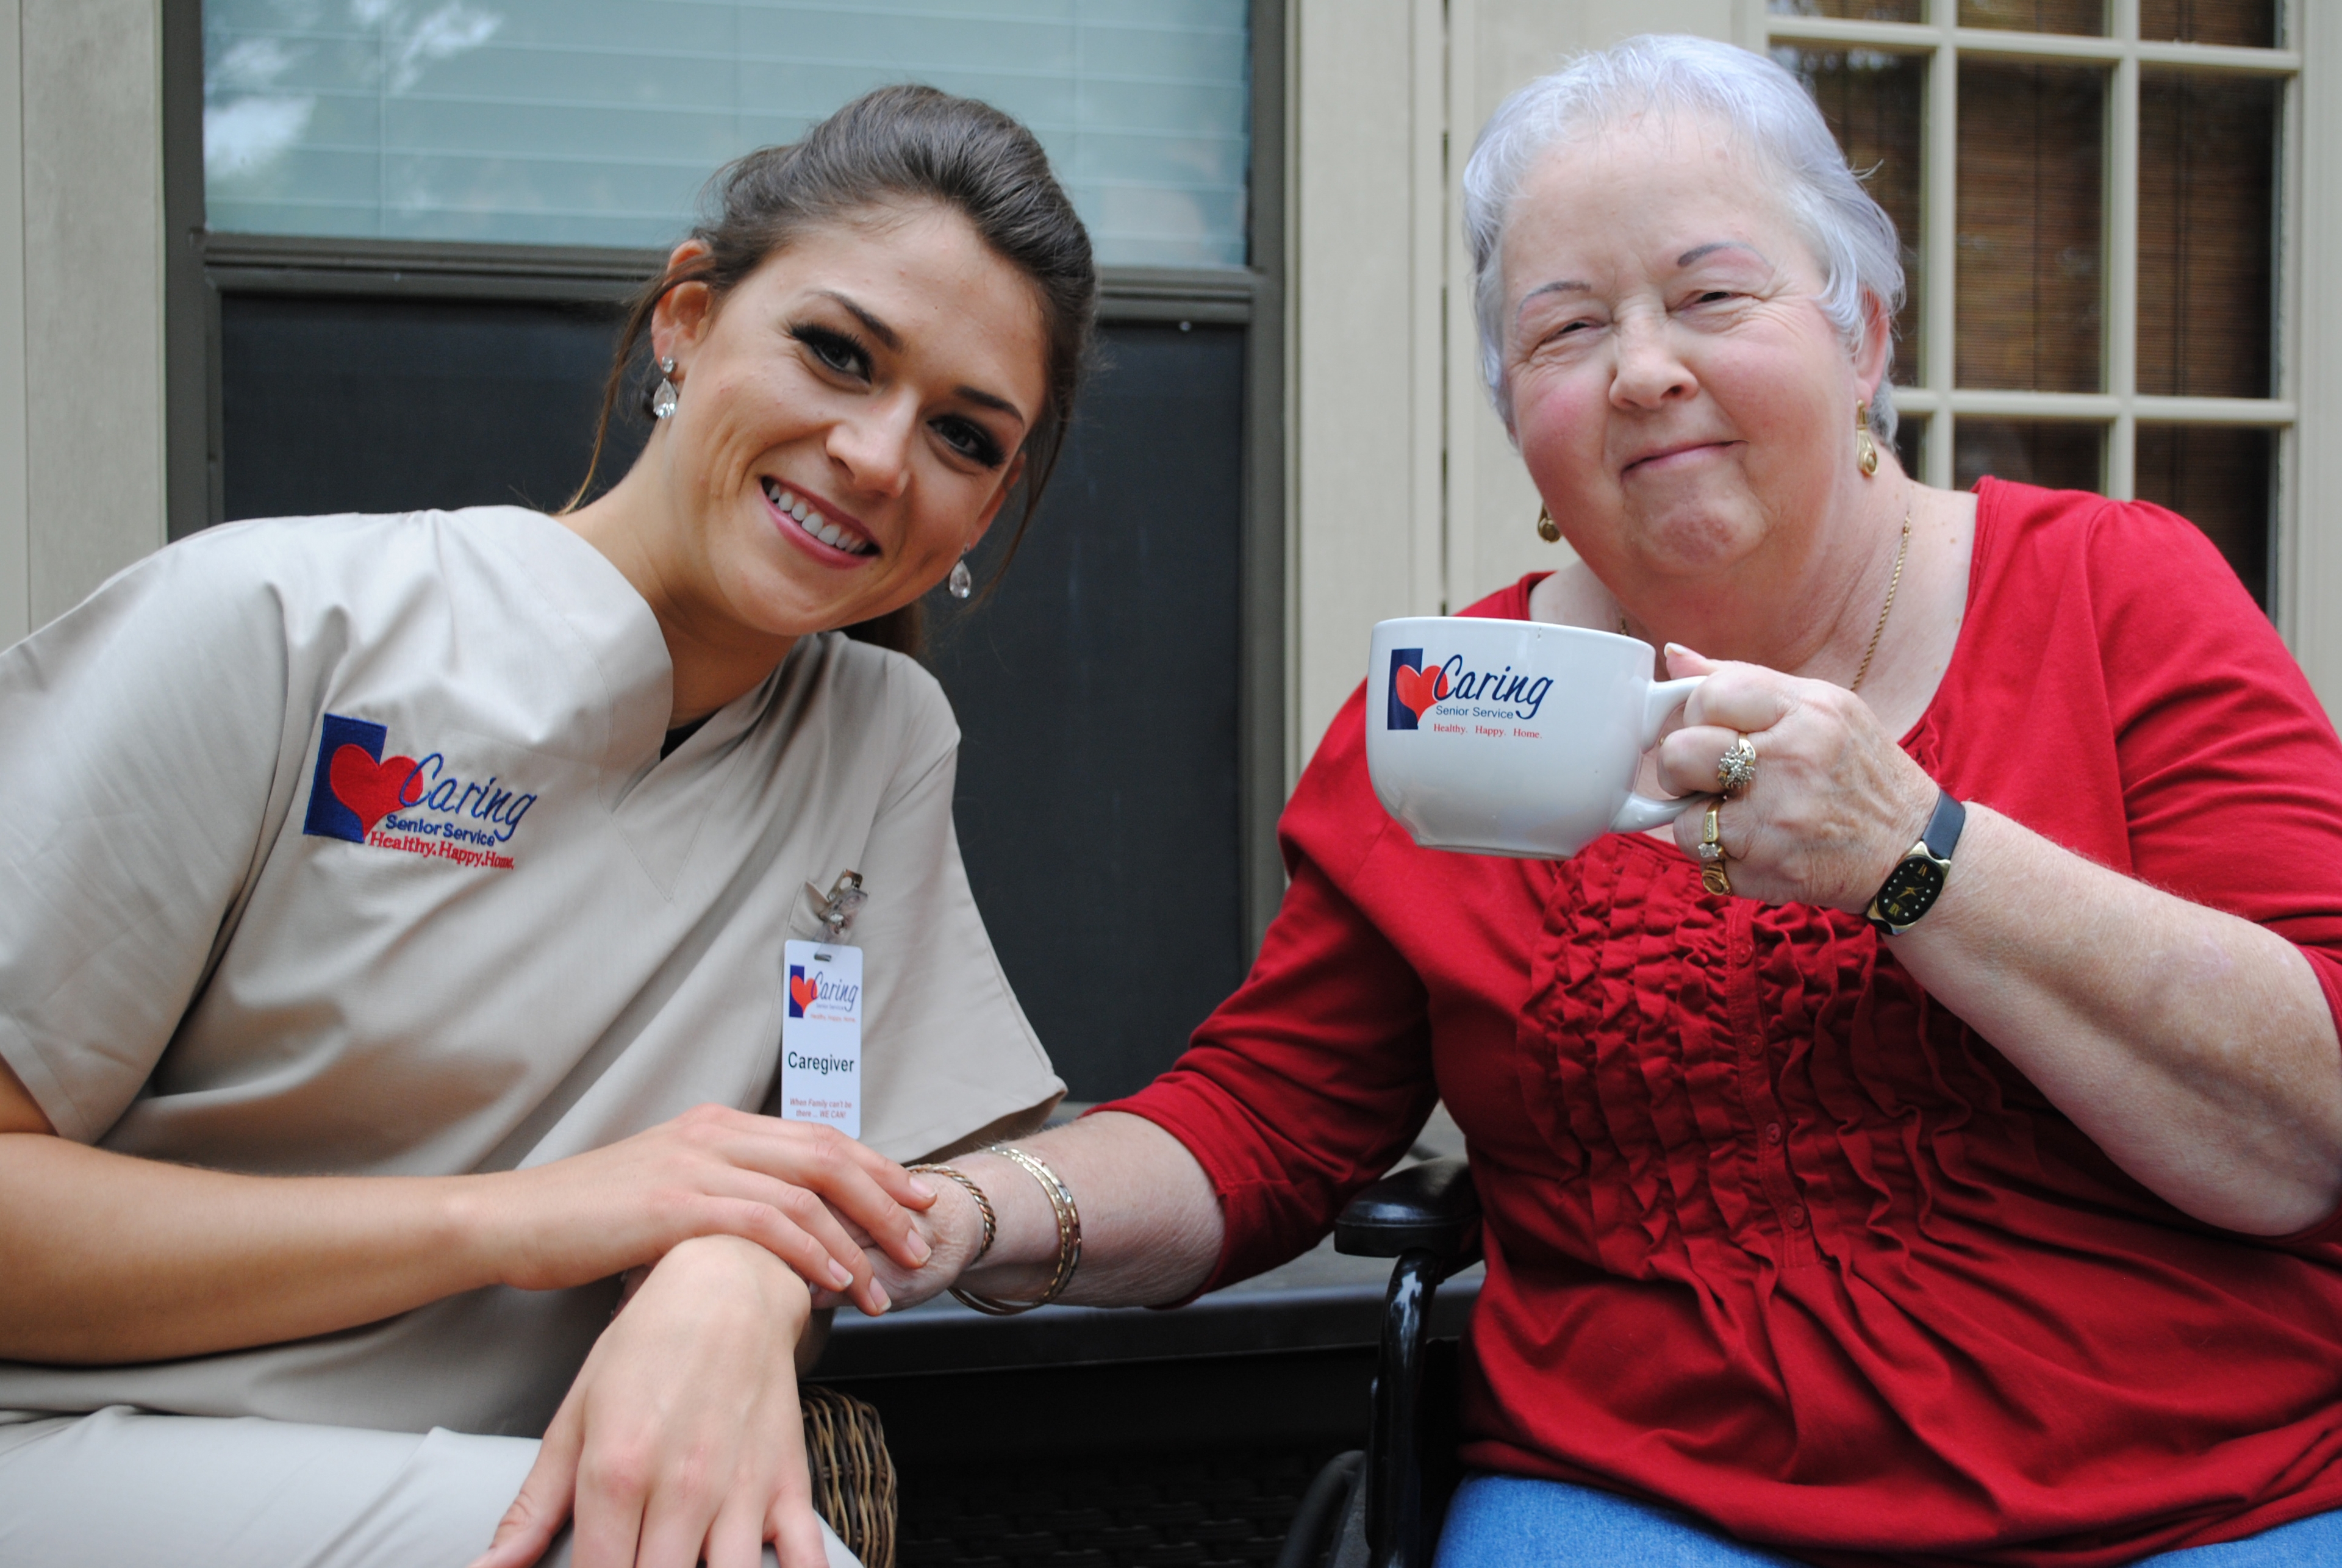 Caring Senior Service of Chattanooga  image